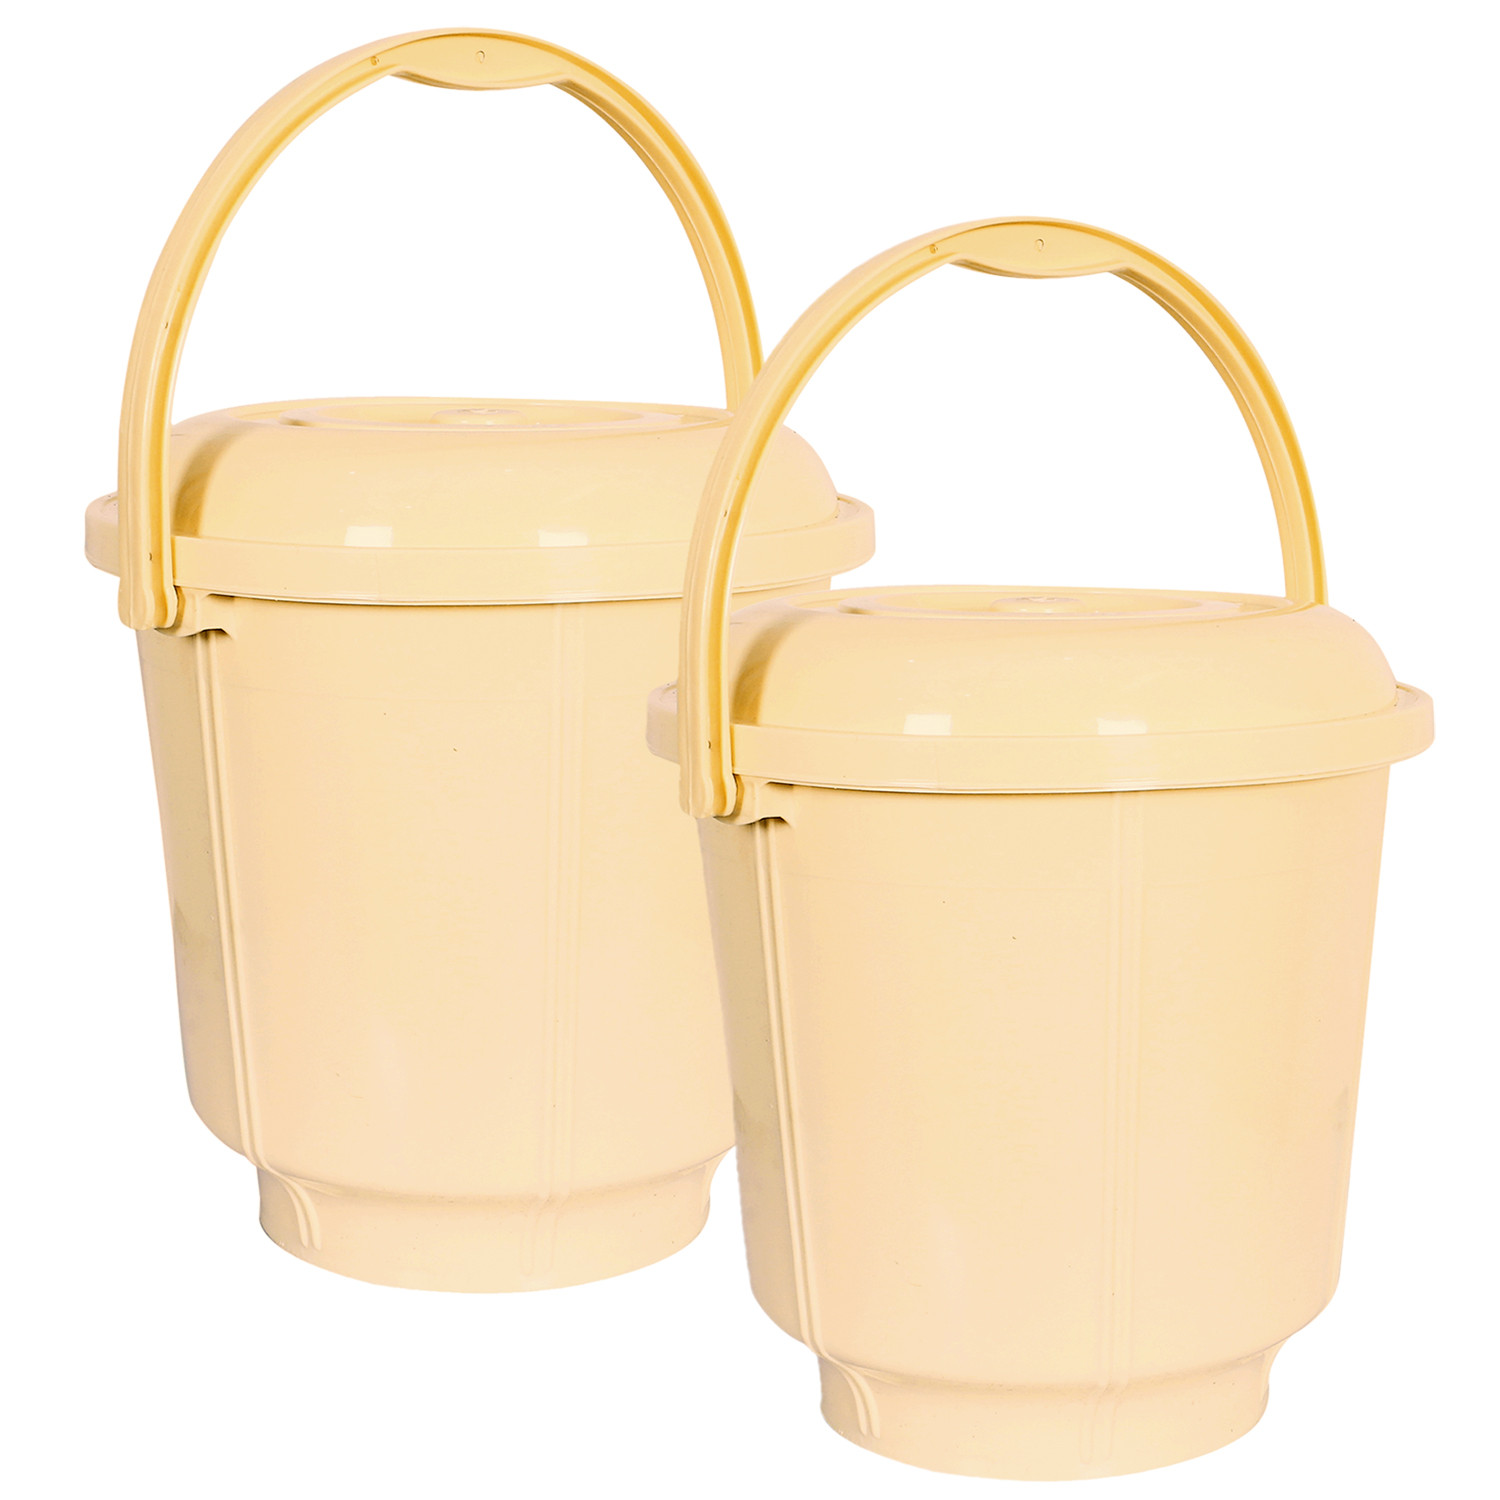 Kuber Industries Unbreakable Plastic Durable & Lightweight Strong Bathroom Bucket With Lid And Handle,13 Ltr.(Cream)